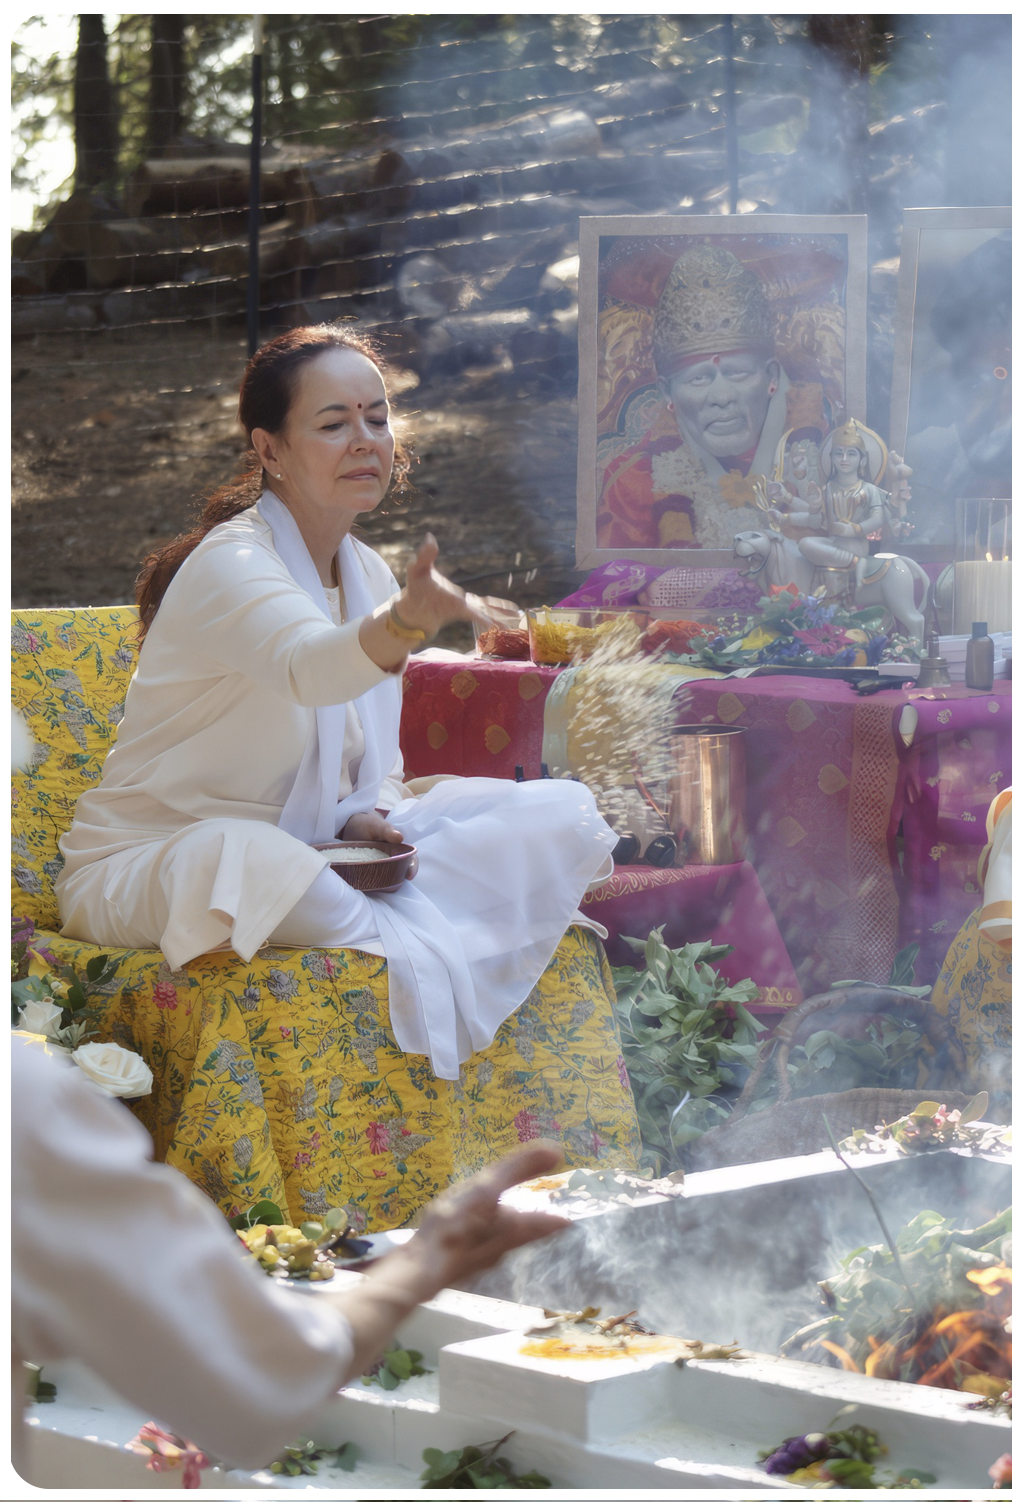 Mataji gives an offering to Mahalakshmi during the fire ceremony at the Divine Mother Center